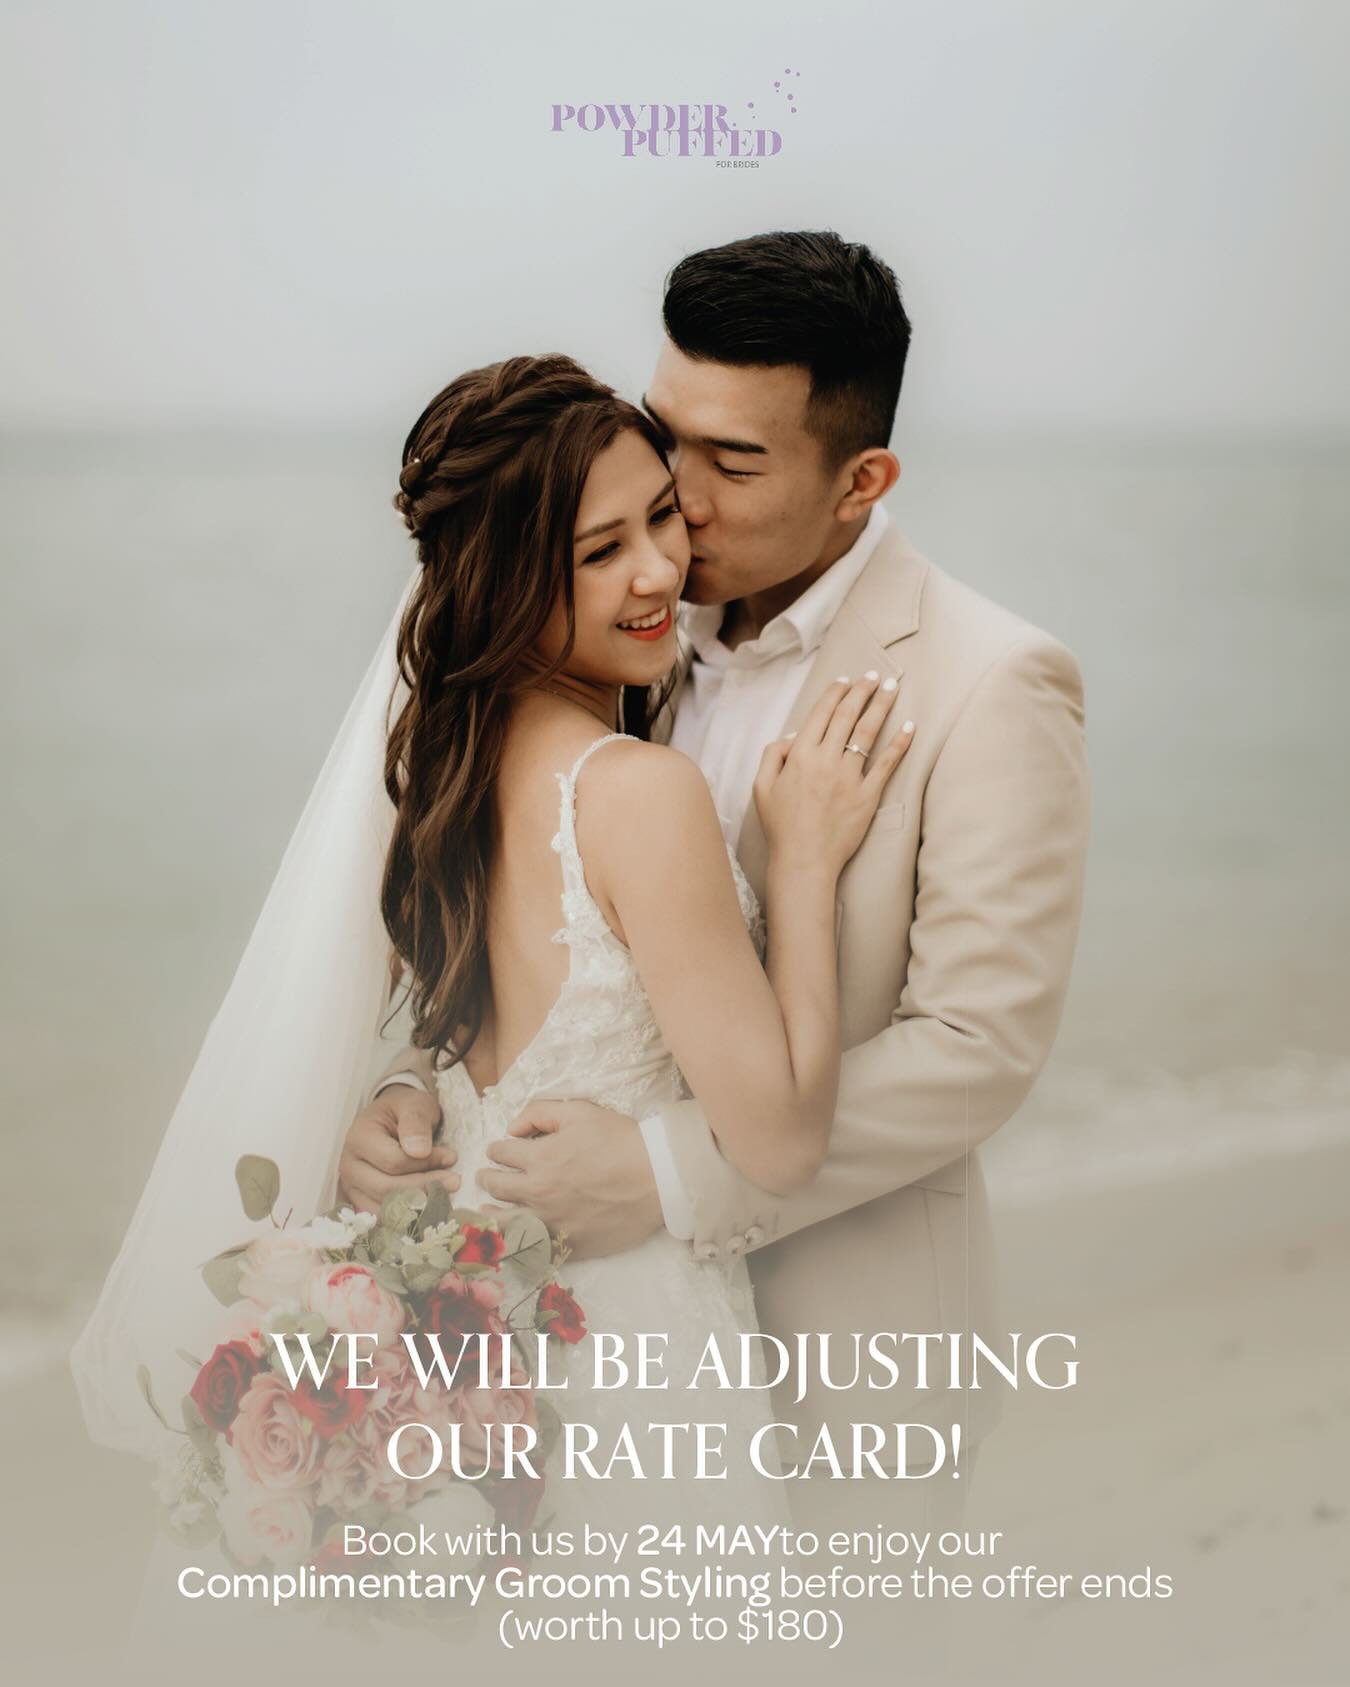 Attention, beautiful brides-to-be! We're updating our rate cards to refine our focus.💜 We will be removing Complimentary Groom Styling (worth up to $180) services in our packages. Hurry and book with us now to still enjoy this extra touch of eleganc